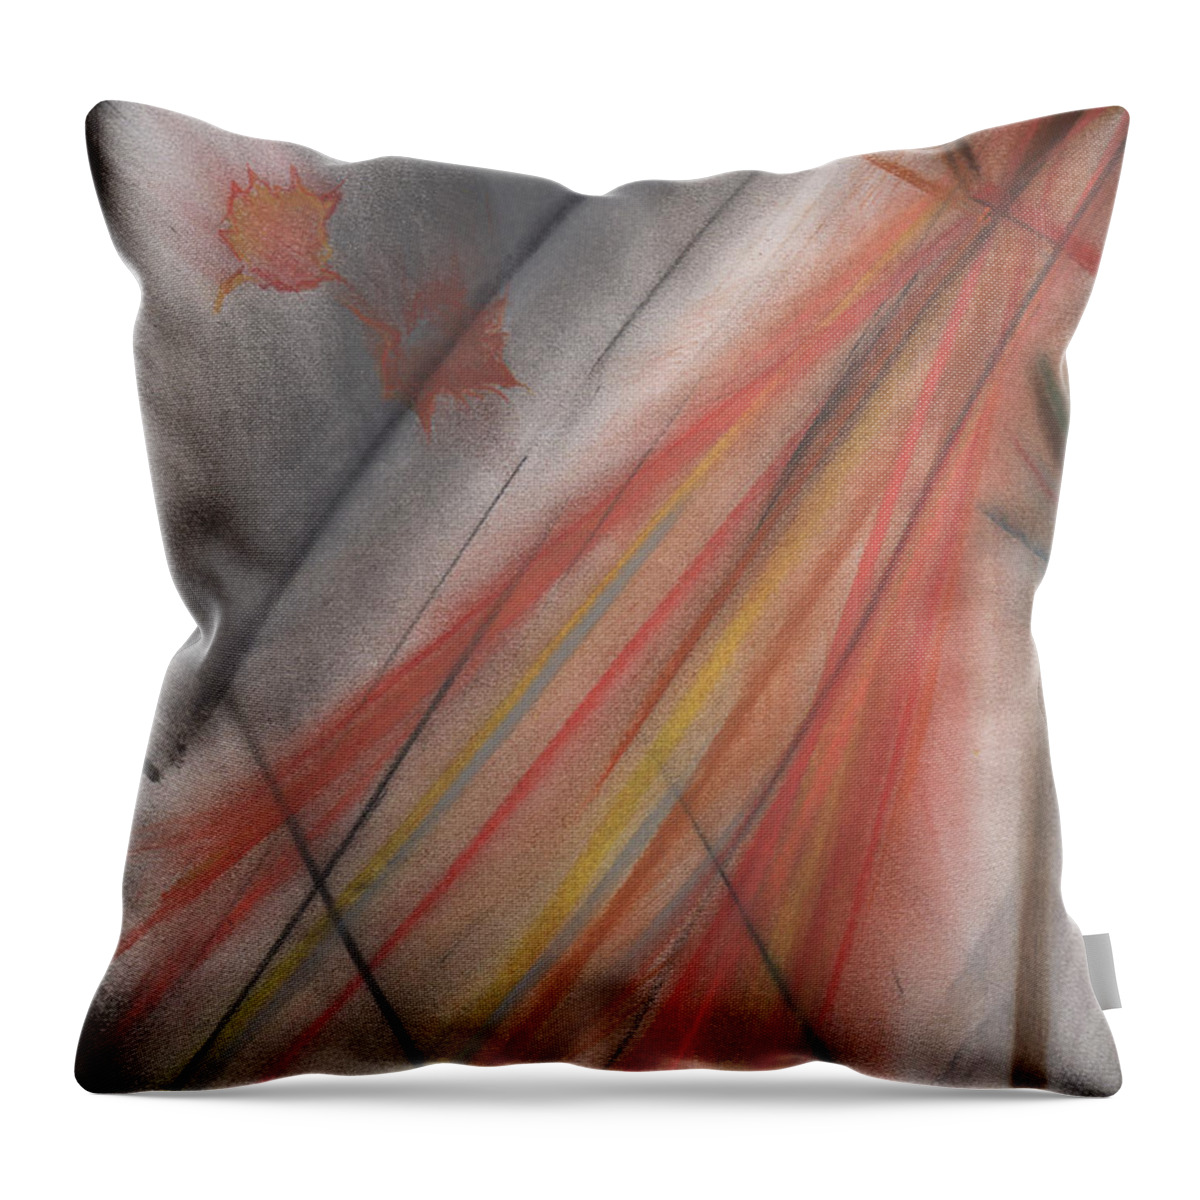  Throw Pillow featuring the painting Busy Broom by jrr by First Star Art